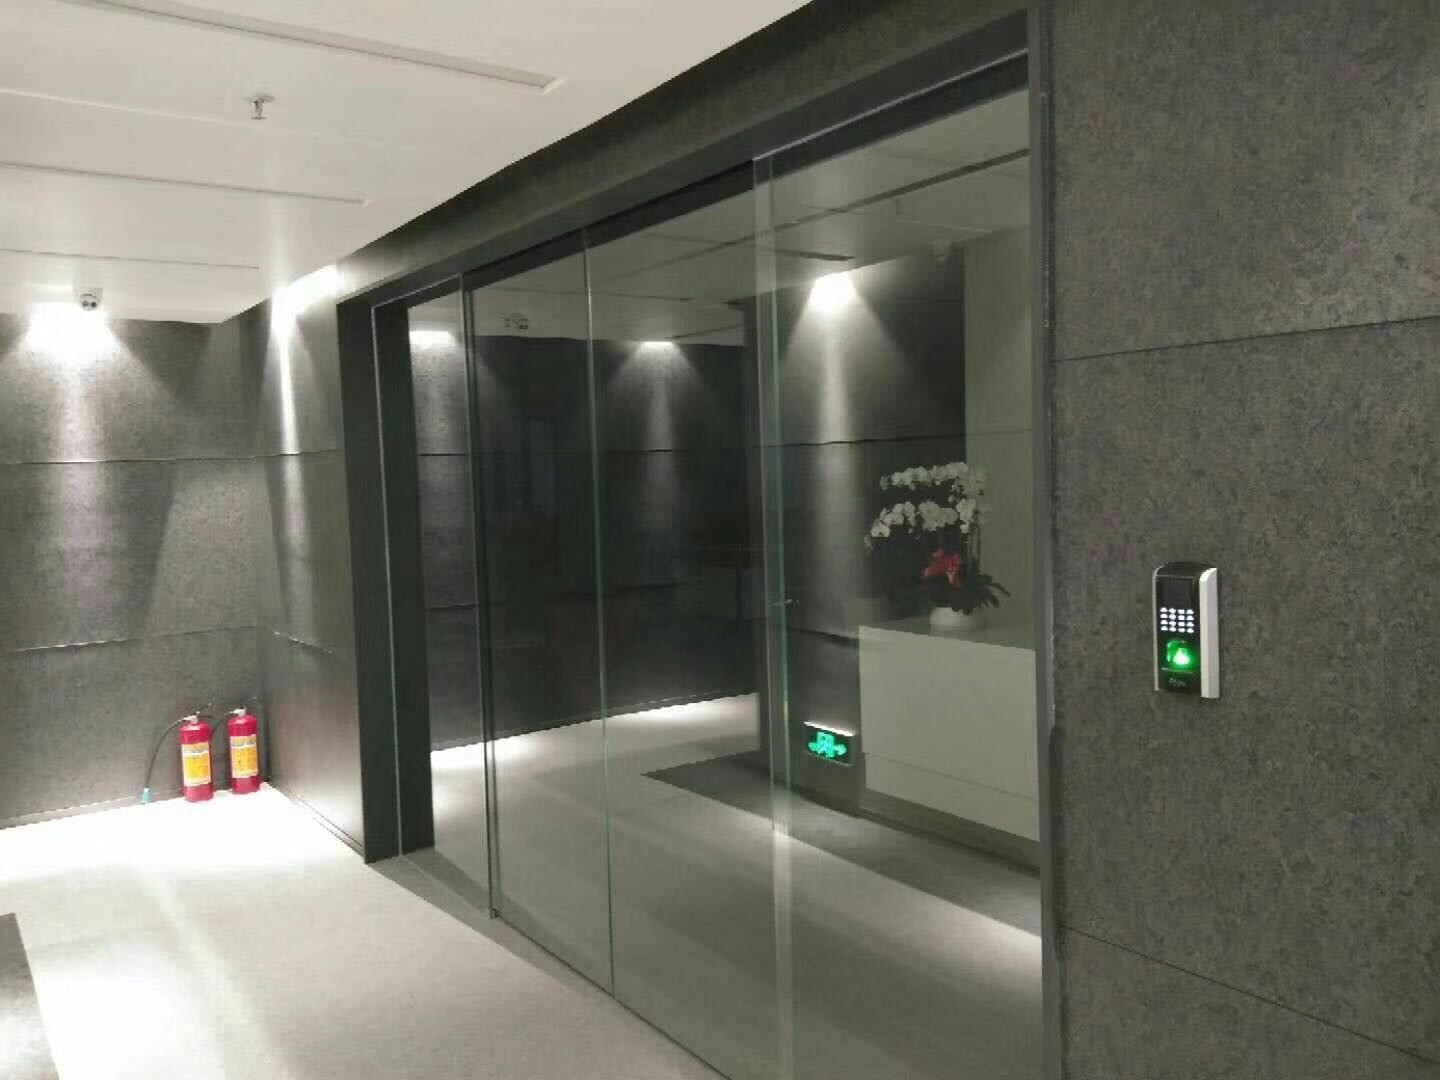 Which automatic door manufacturer in Shenzhen has guaranteed after-sales service